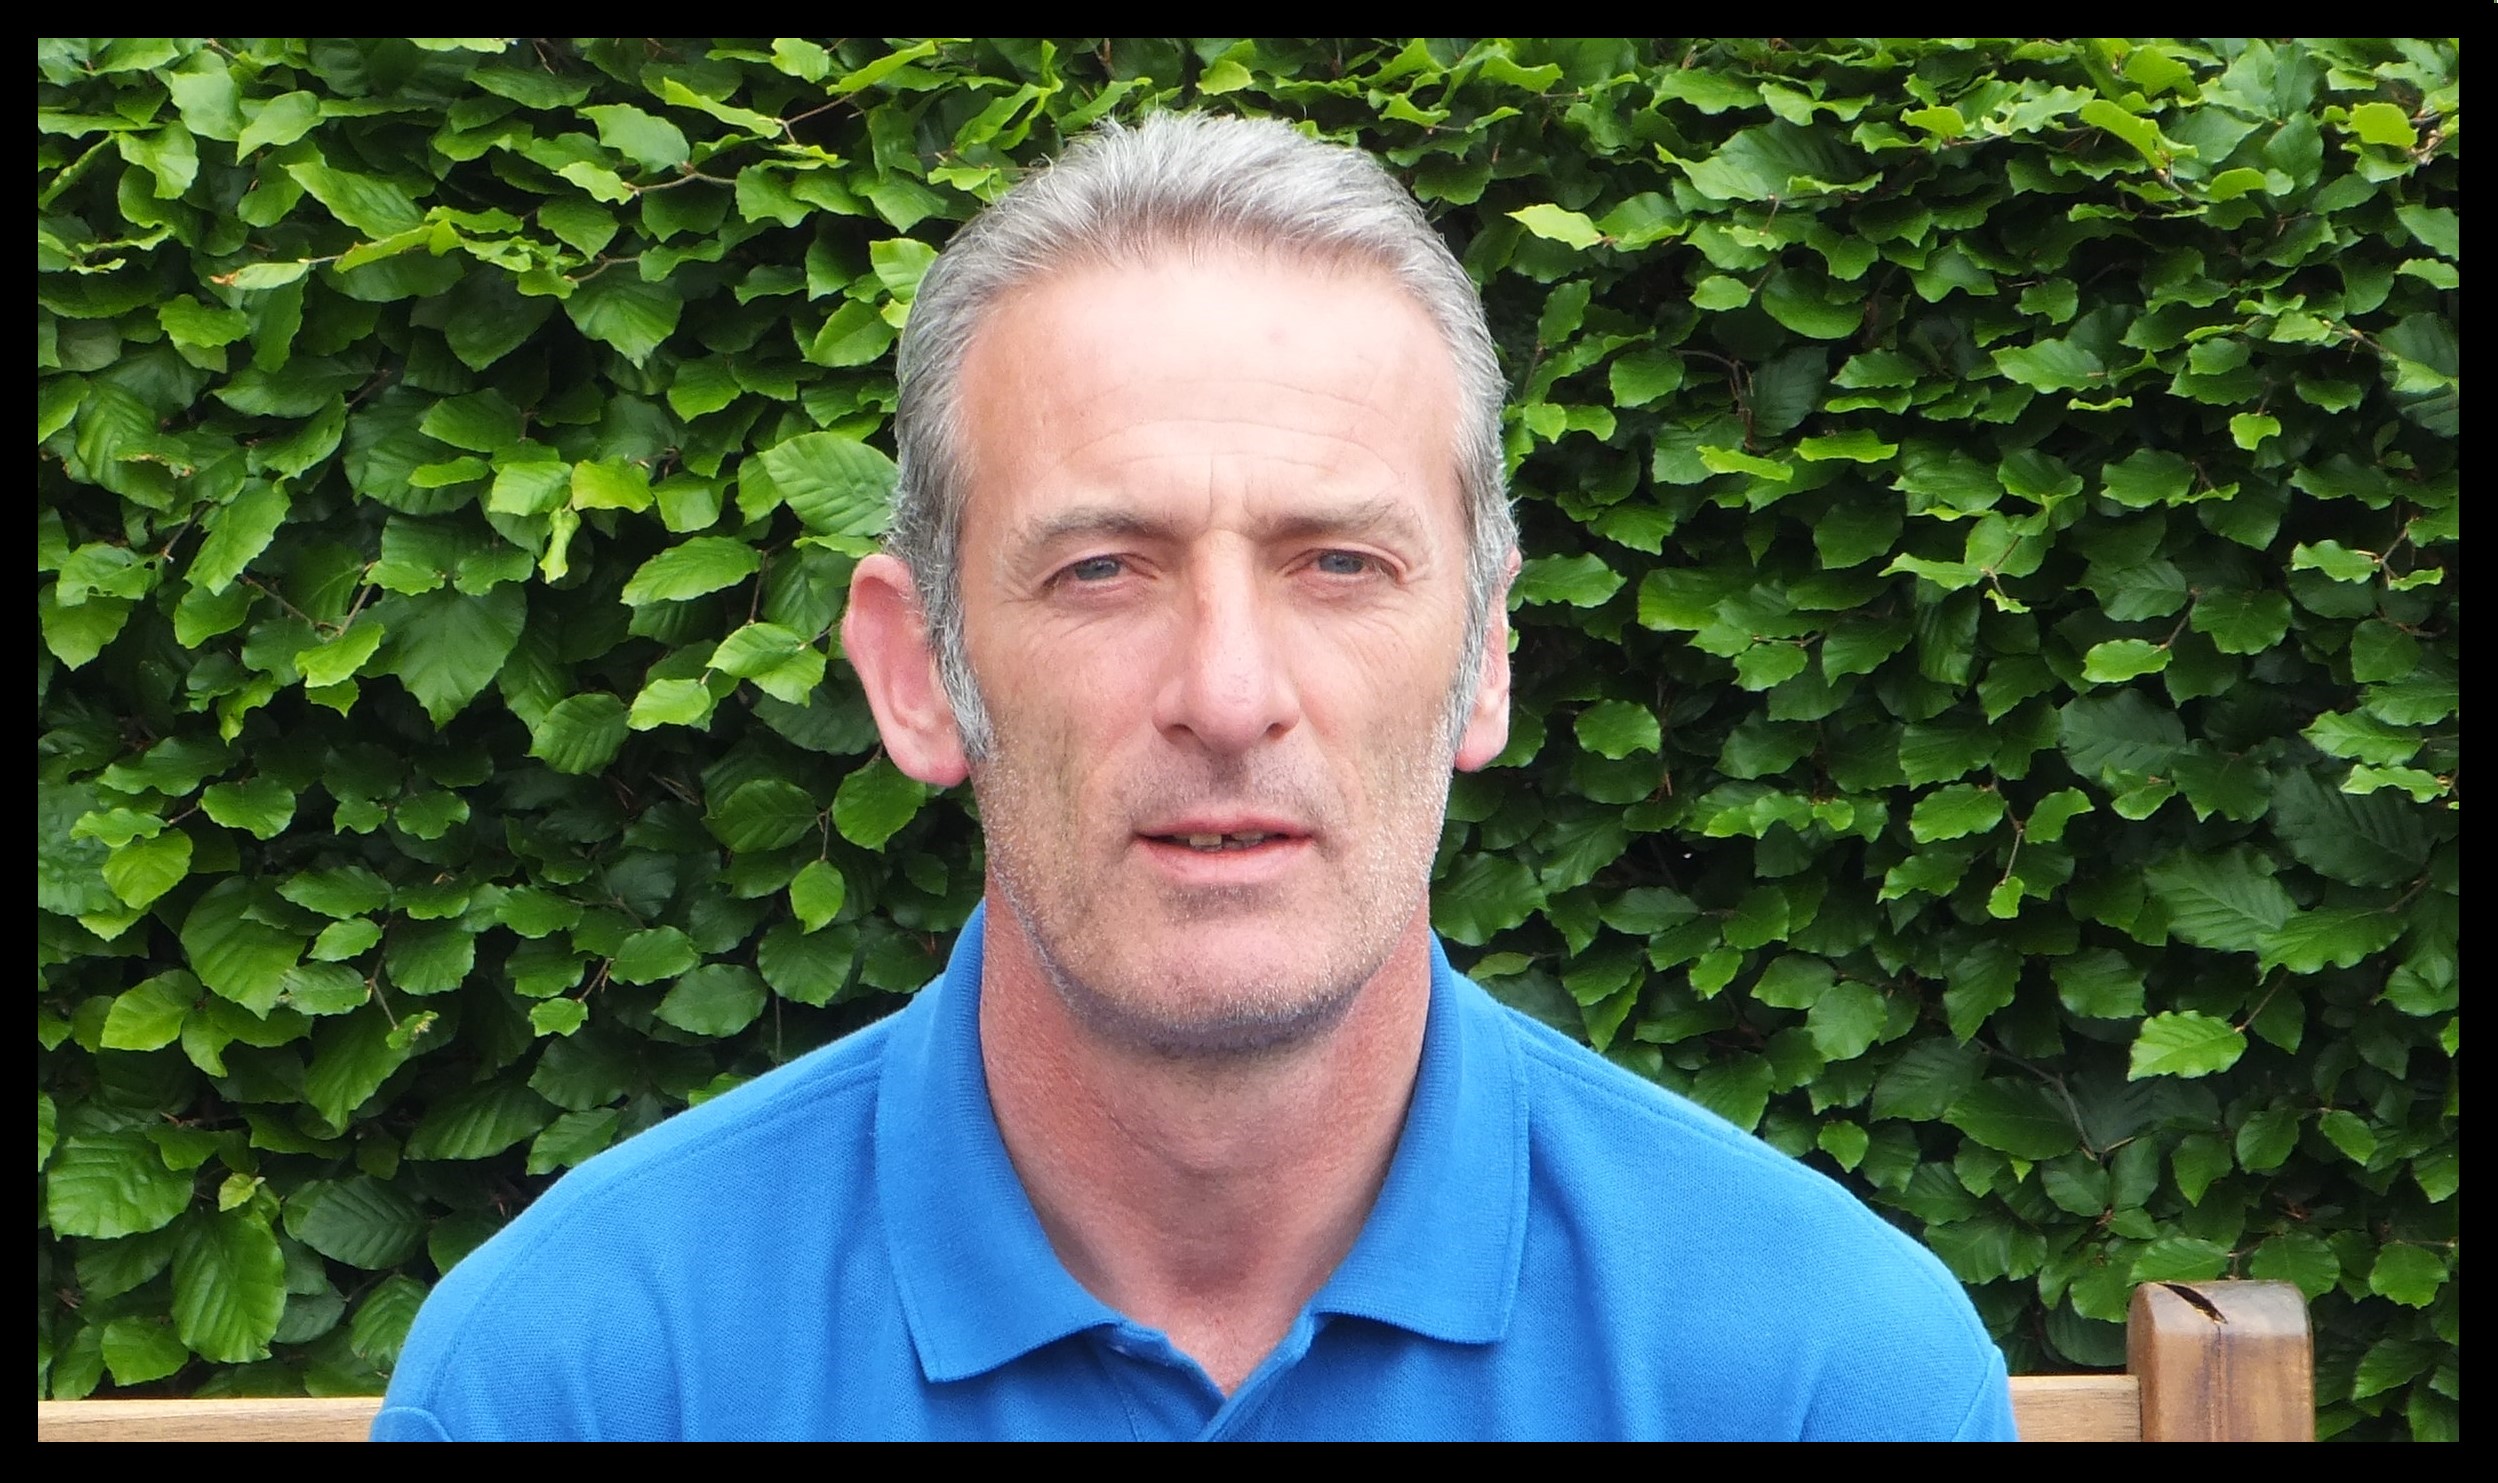 Paul Farn - Operations and Safety Director